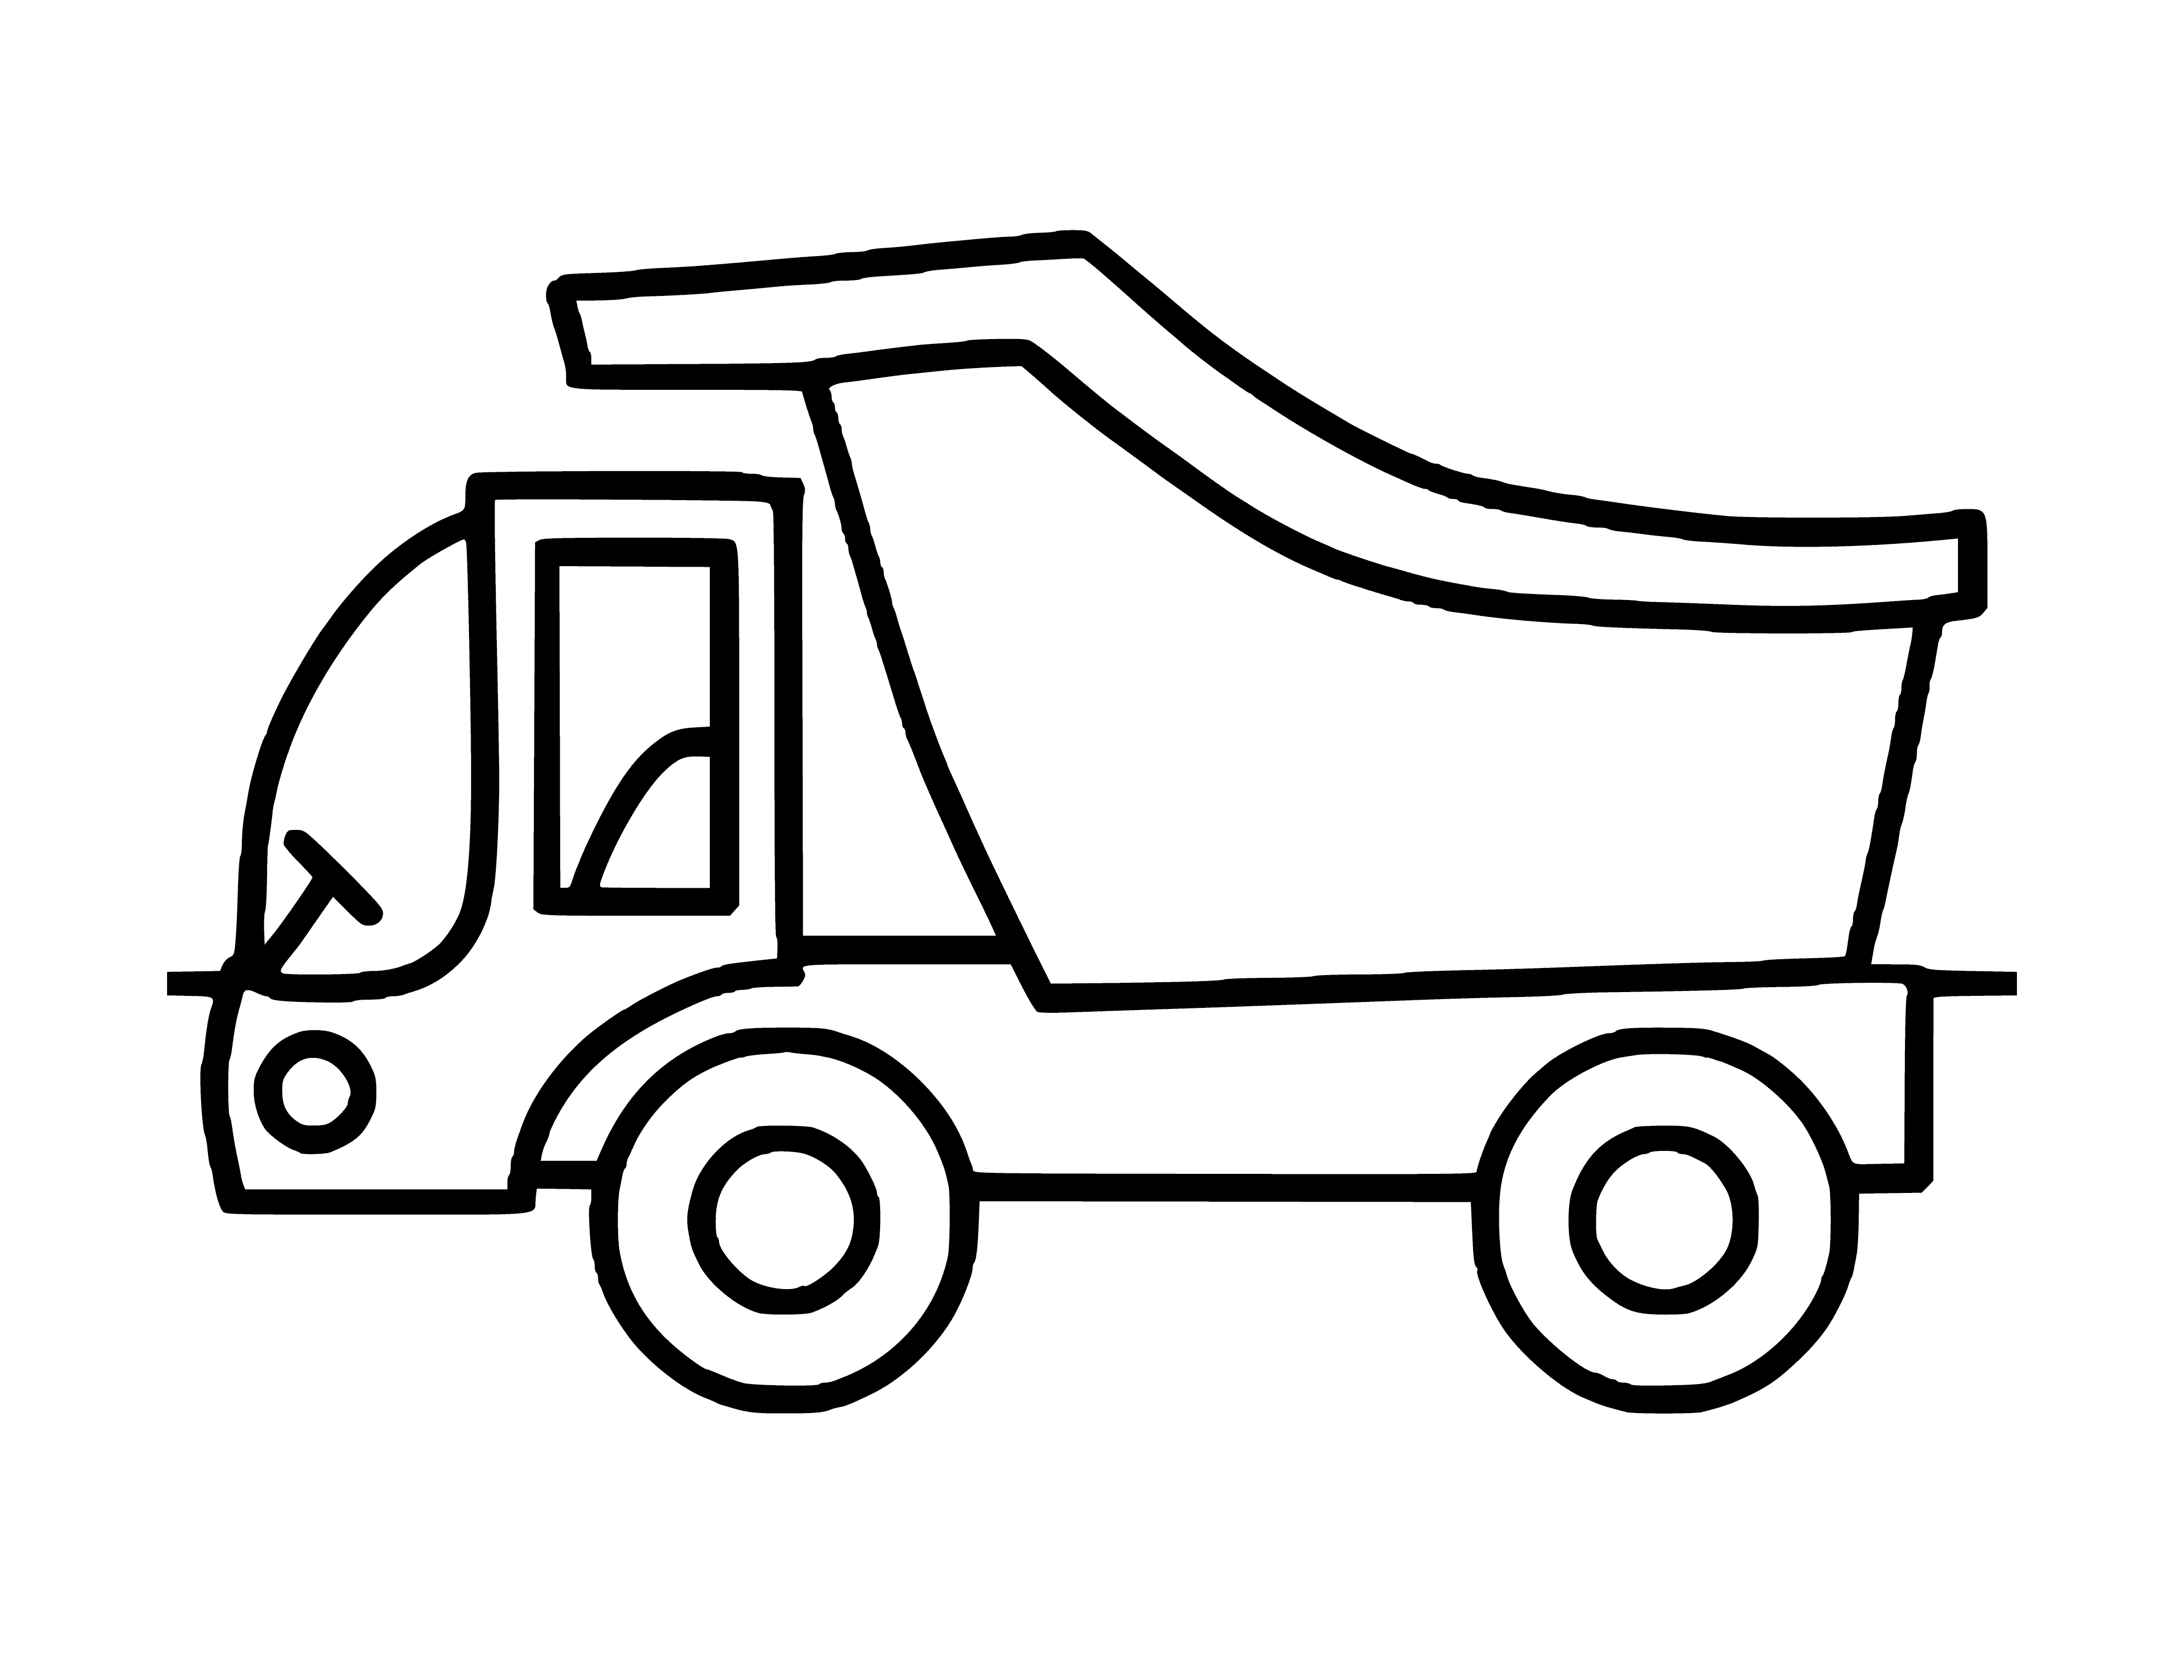 Truck coloring page